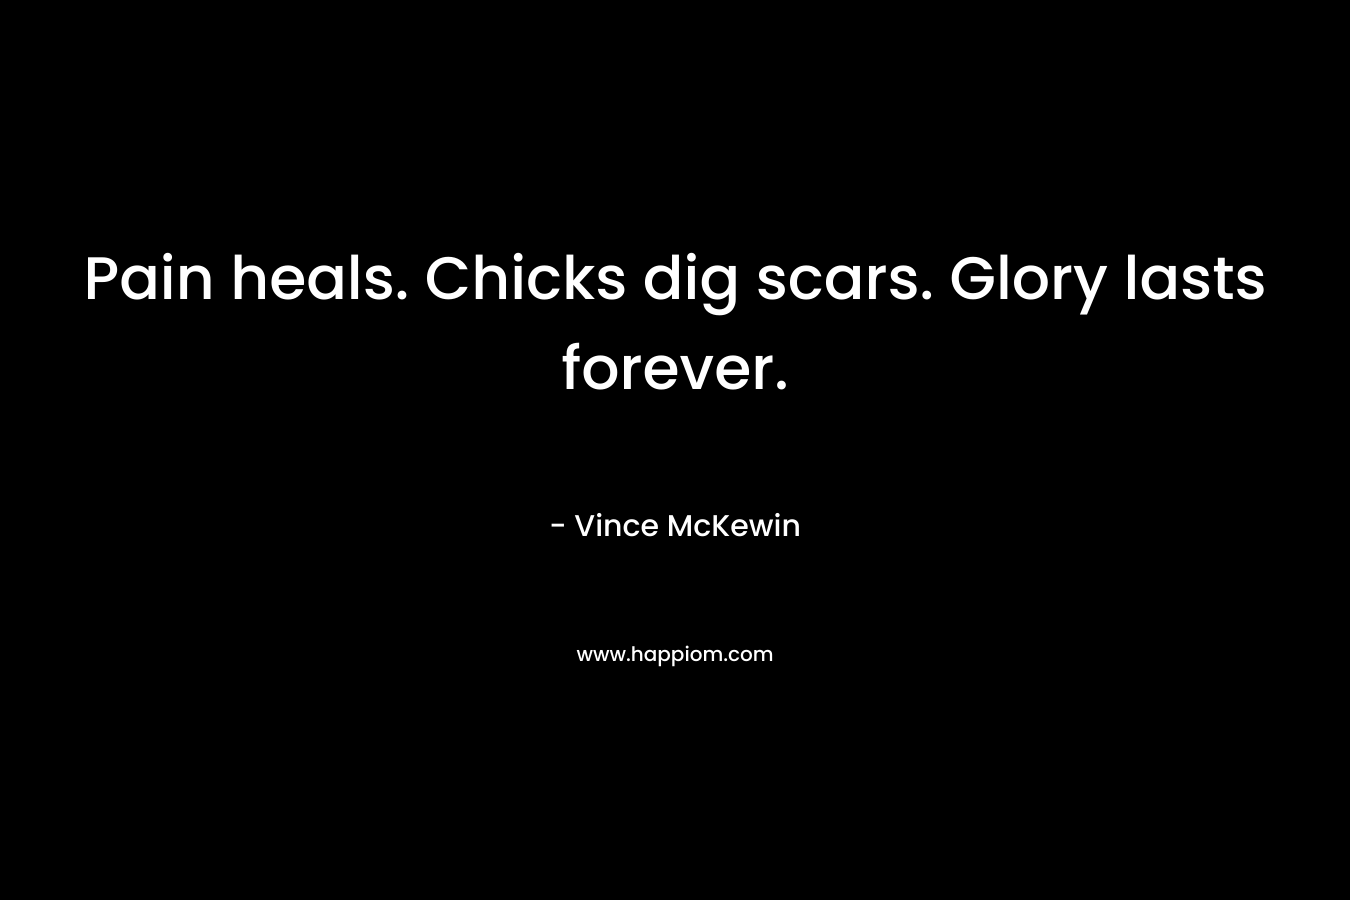 Pain heals. Chicks dig scars. Glory lasts forever. – Vince McKewin